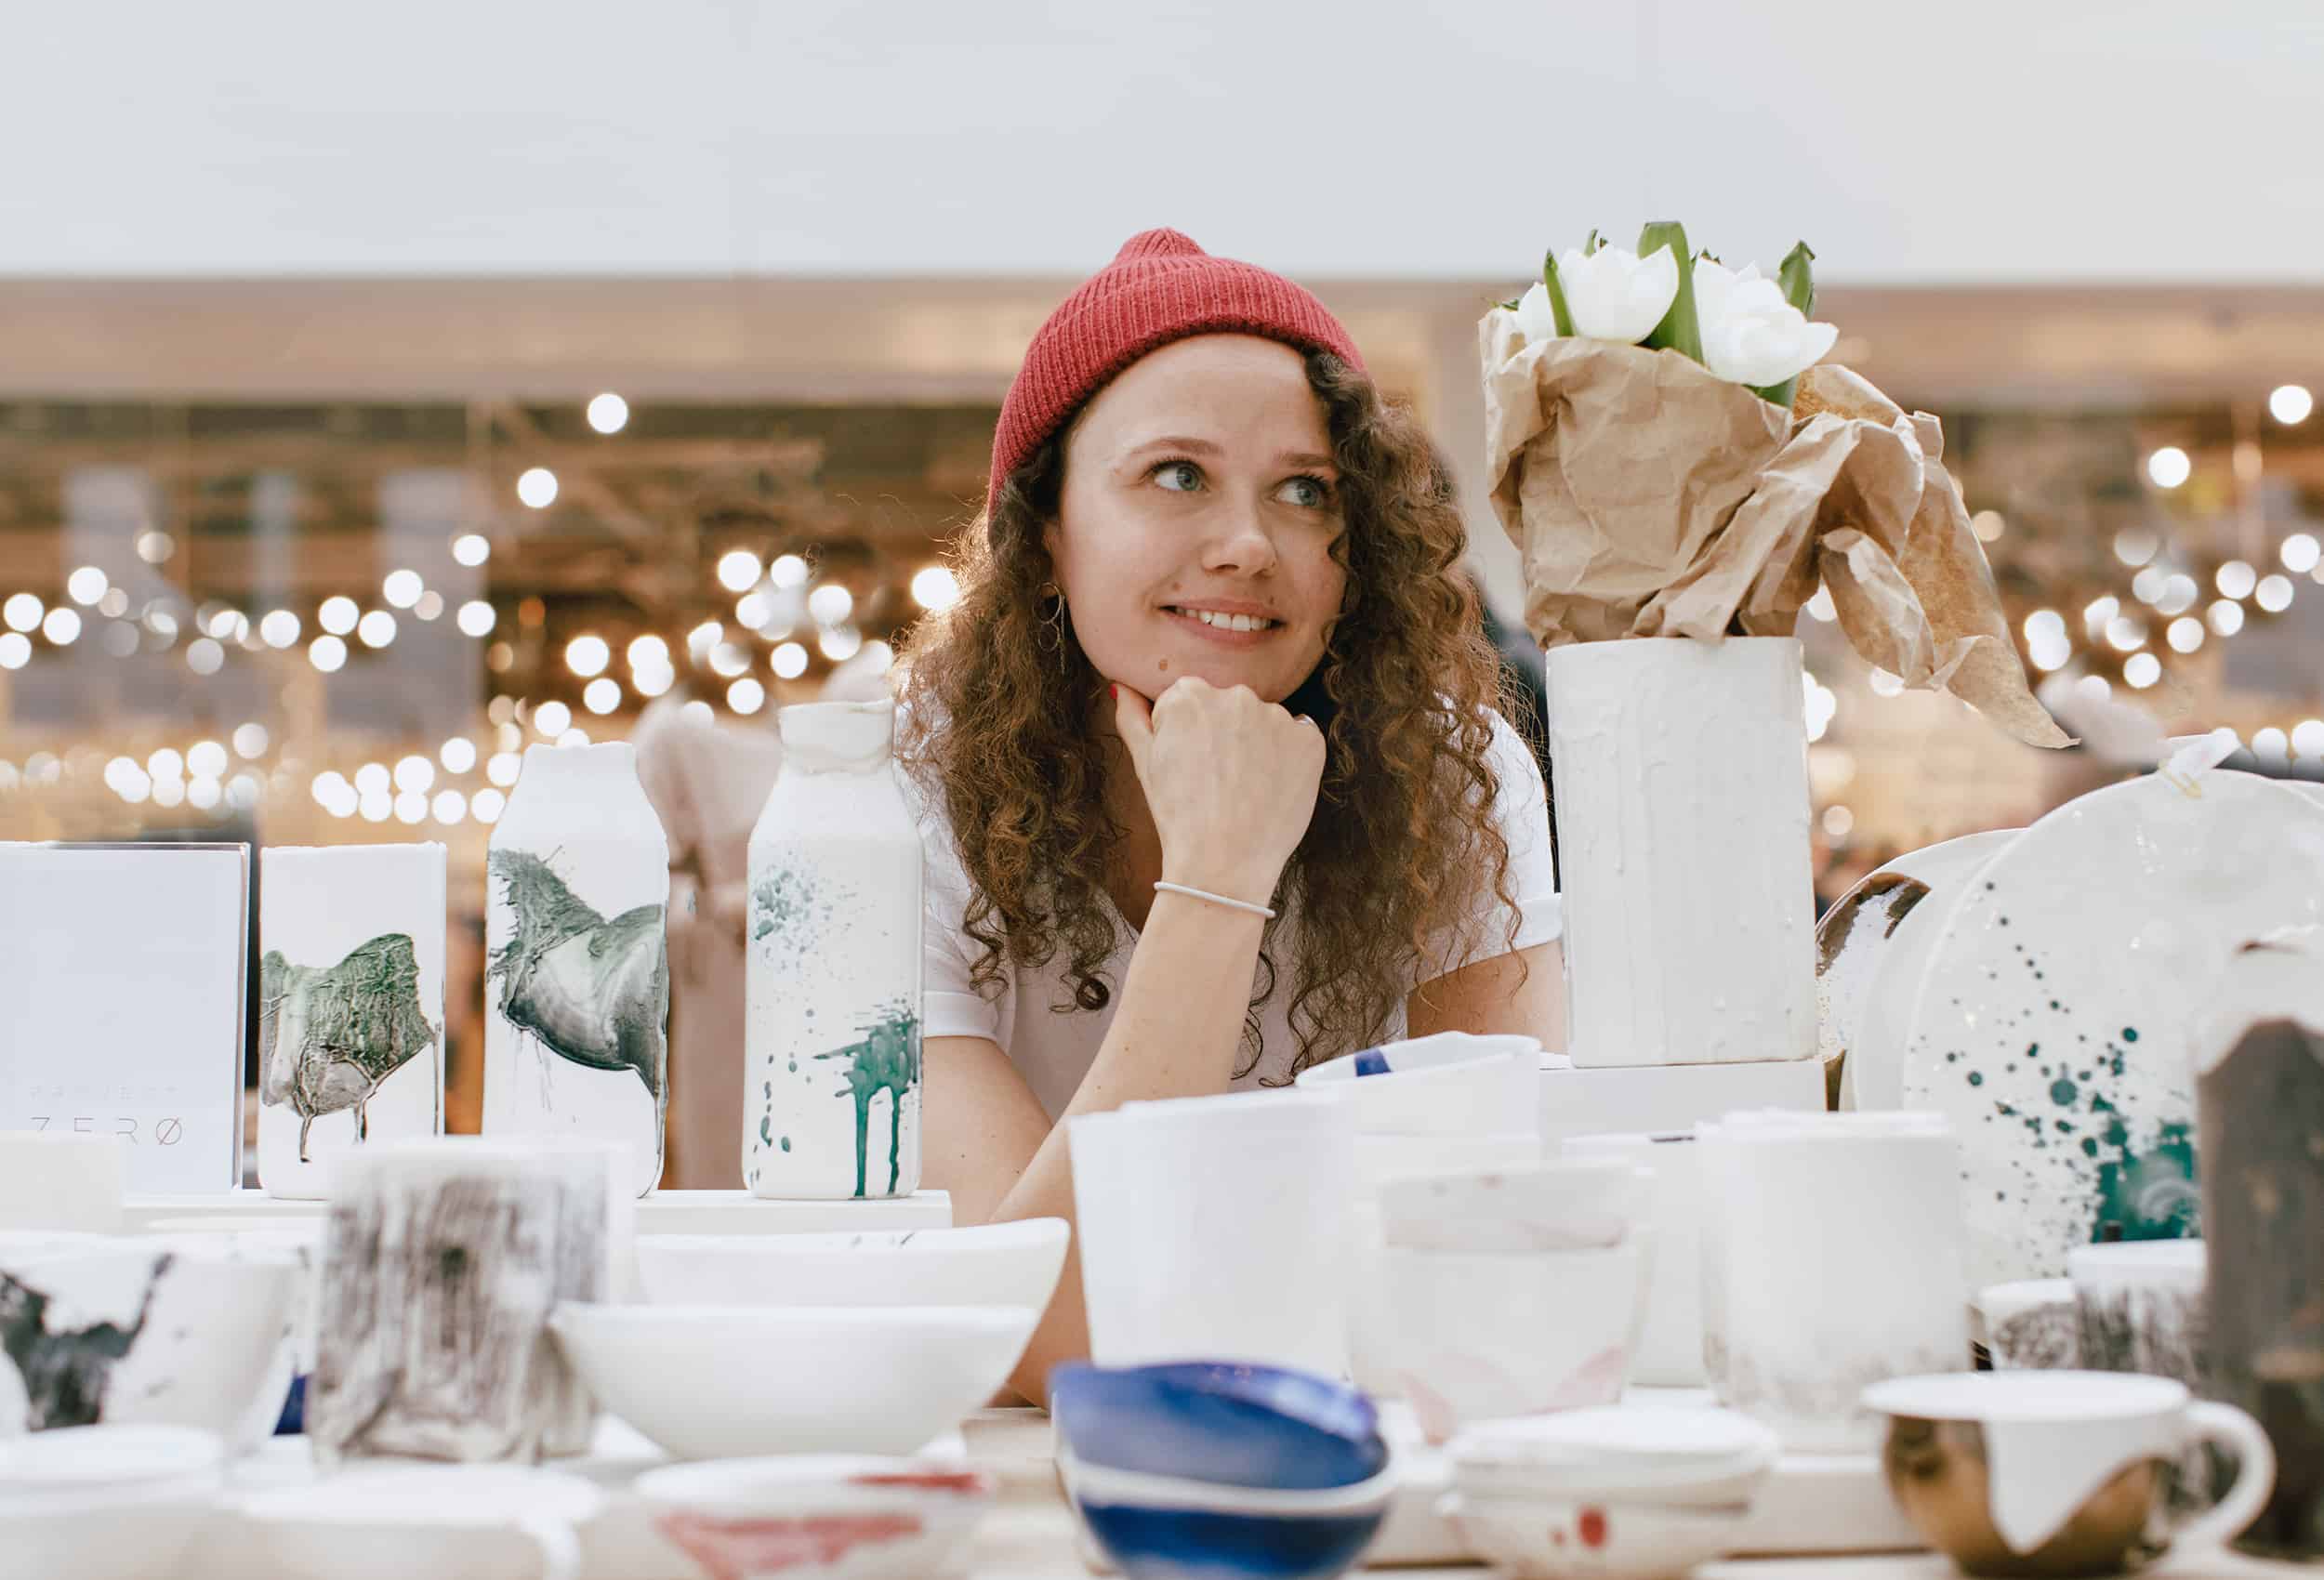 woman-wearing-a-red-beanie-daydreaming-surrounded-by-ceramics-and-art